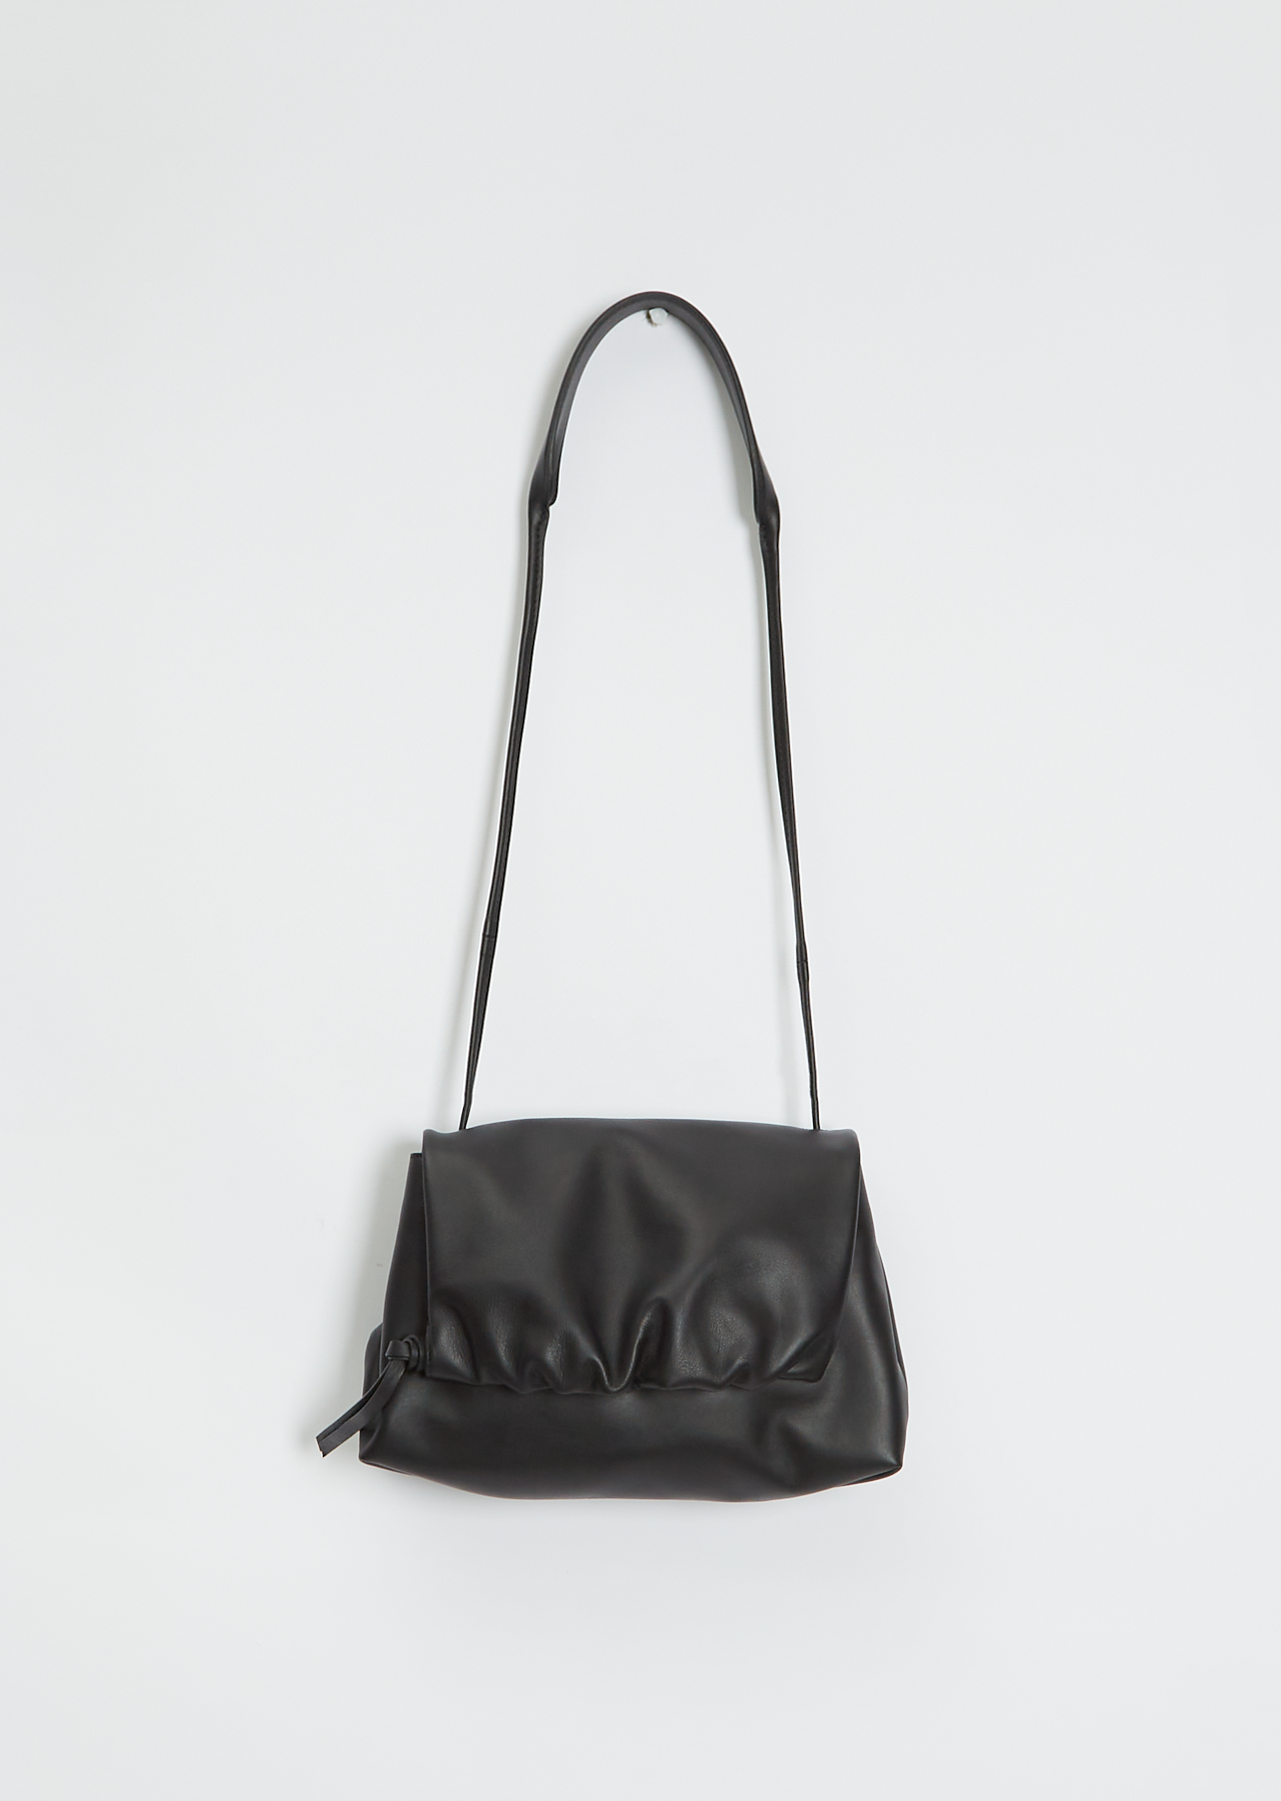 COS Gathered Leather Crossbody Bag in Black